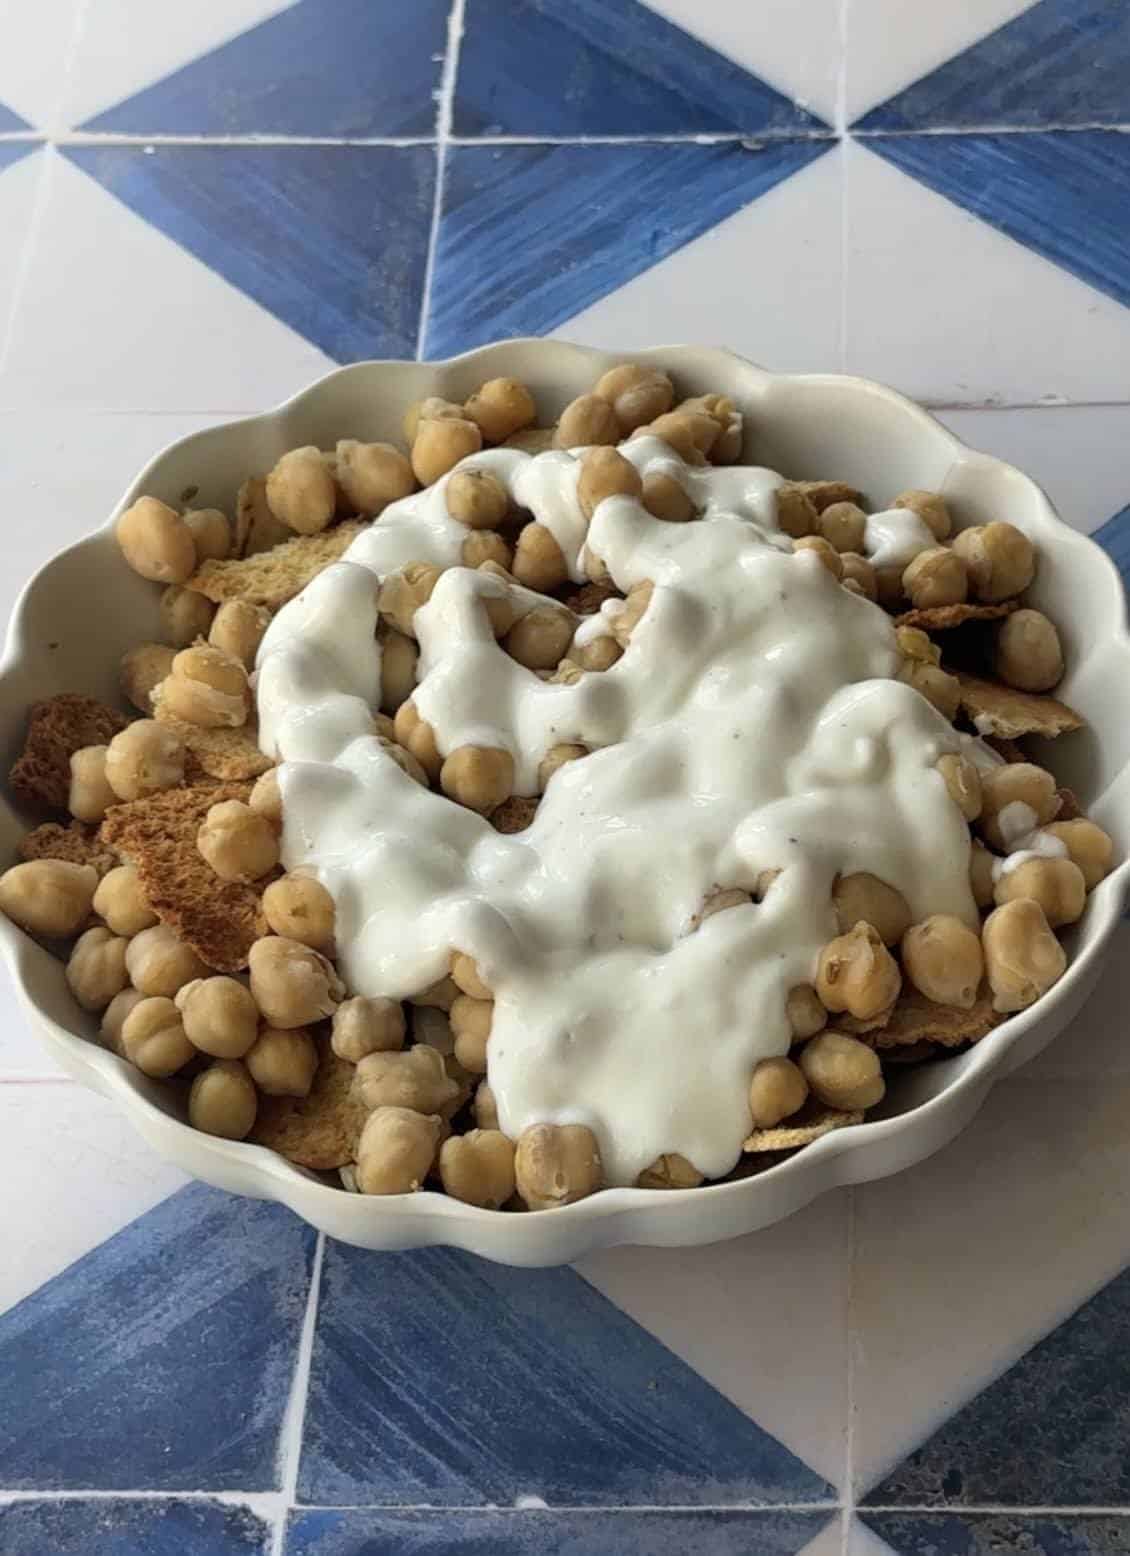 golden brown crispy pita bread topped with spiced chickpeas and drizzled with a creamy yogurt sauce